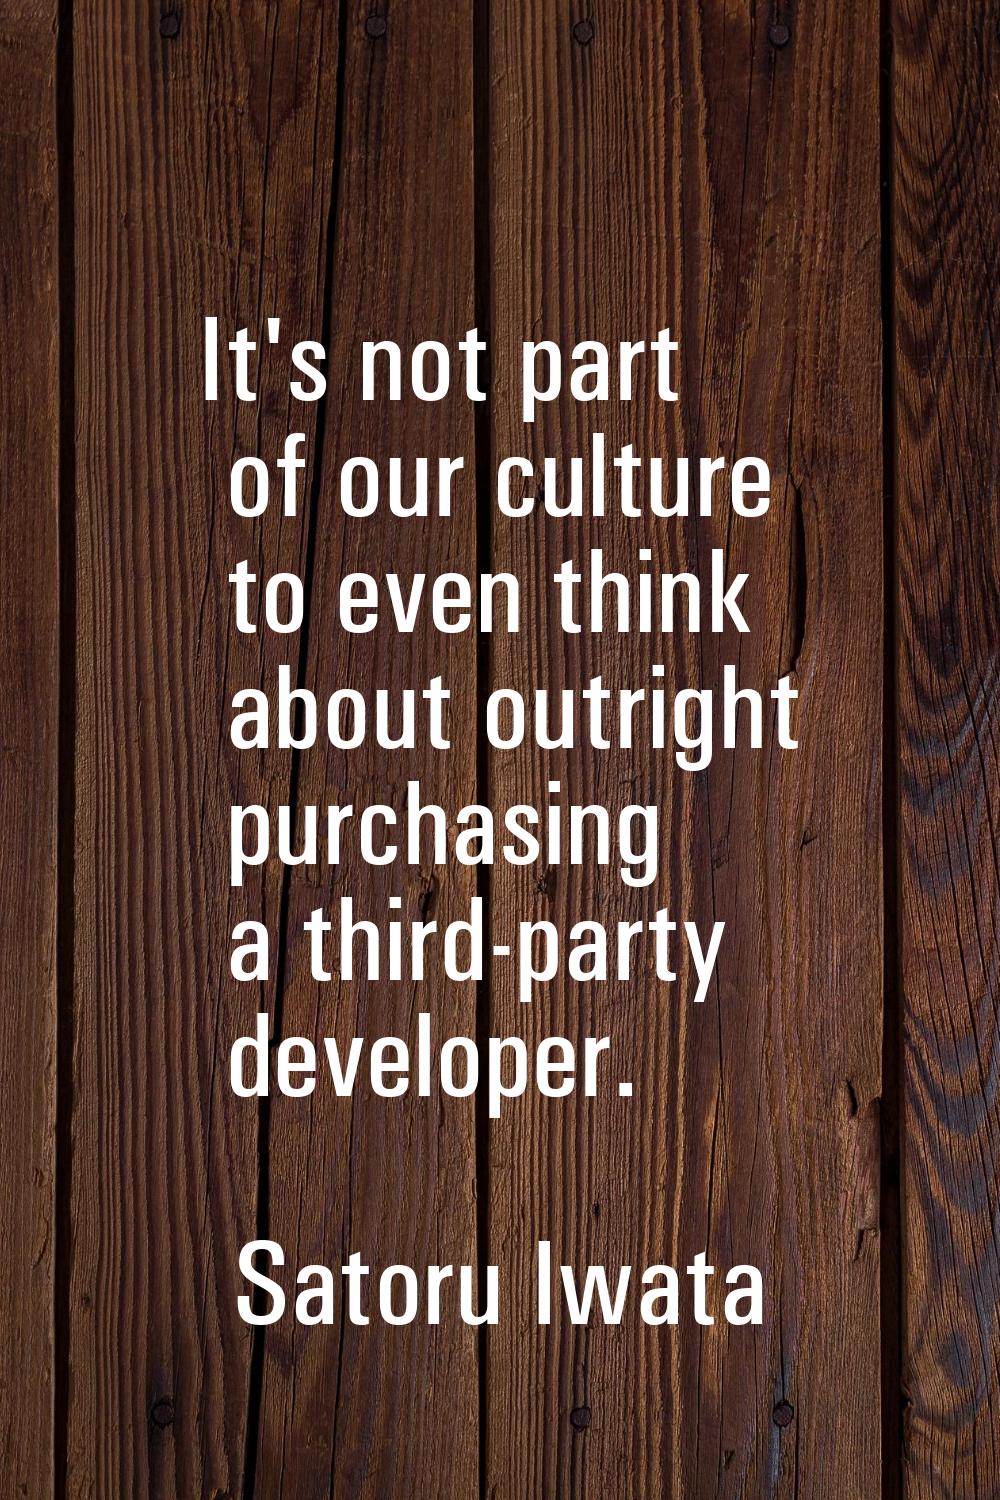 It's not part of our culture to even think about outright purchasing a third-party developer.